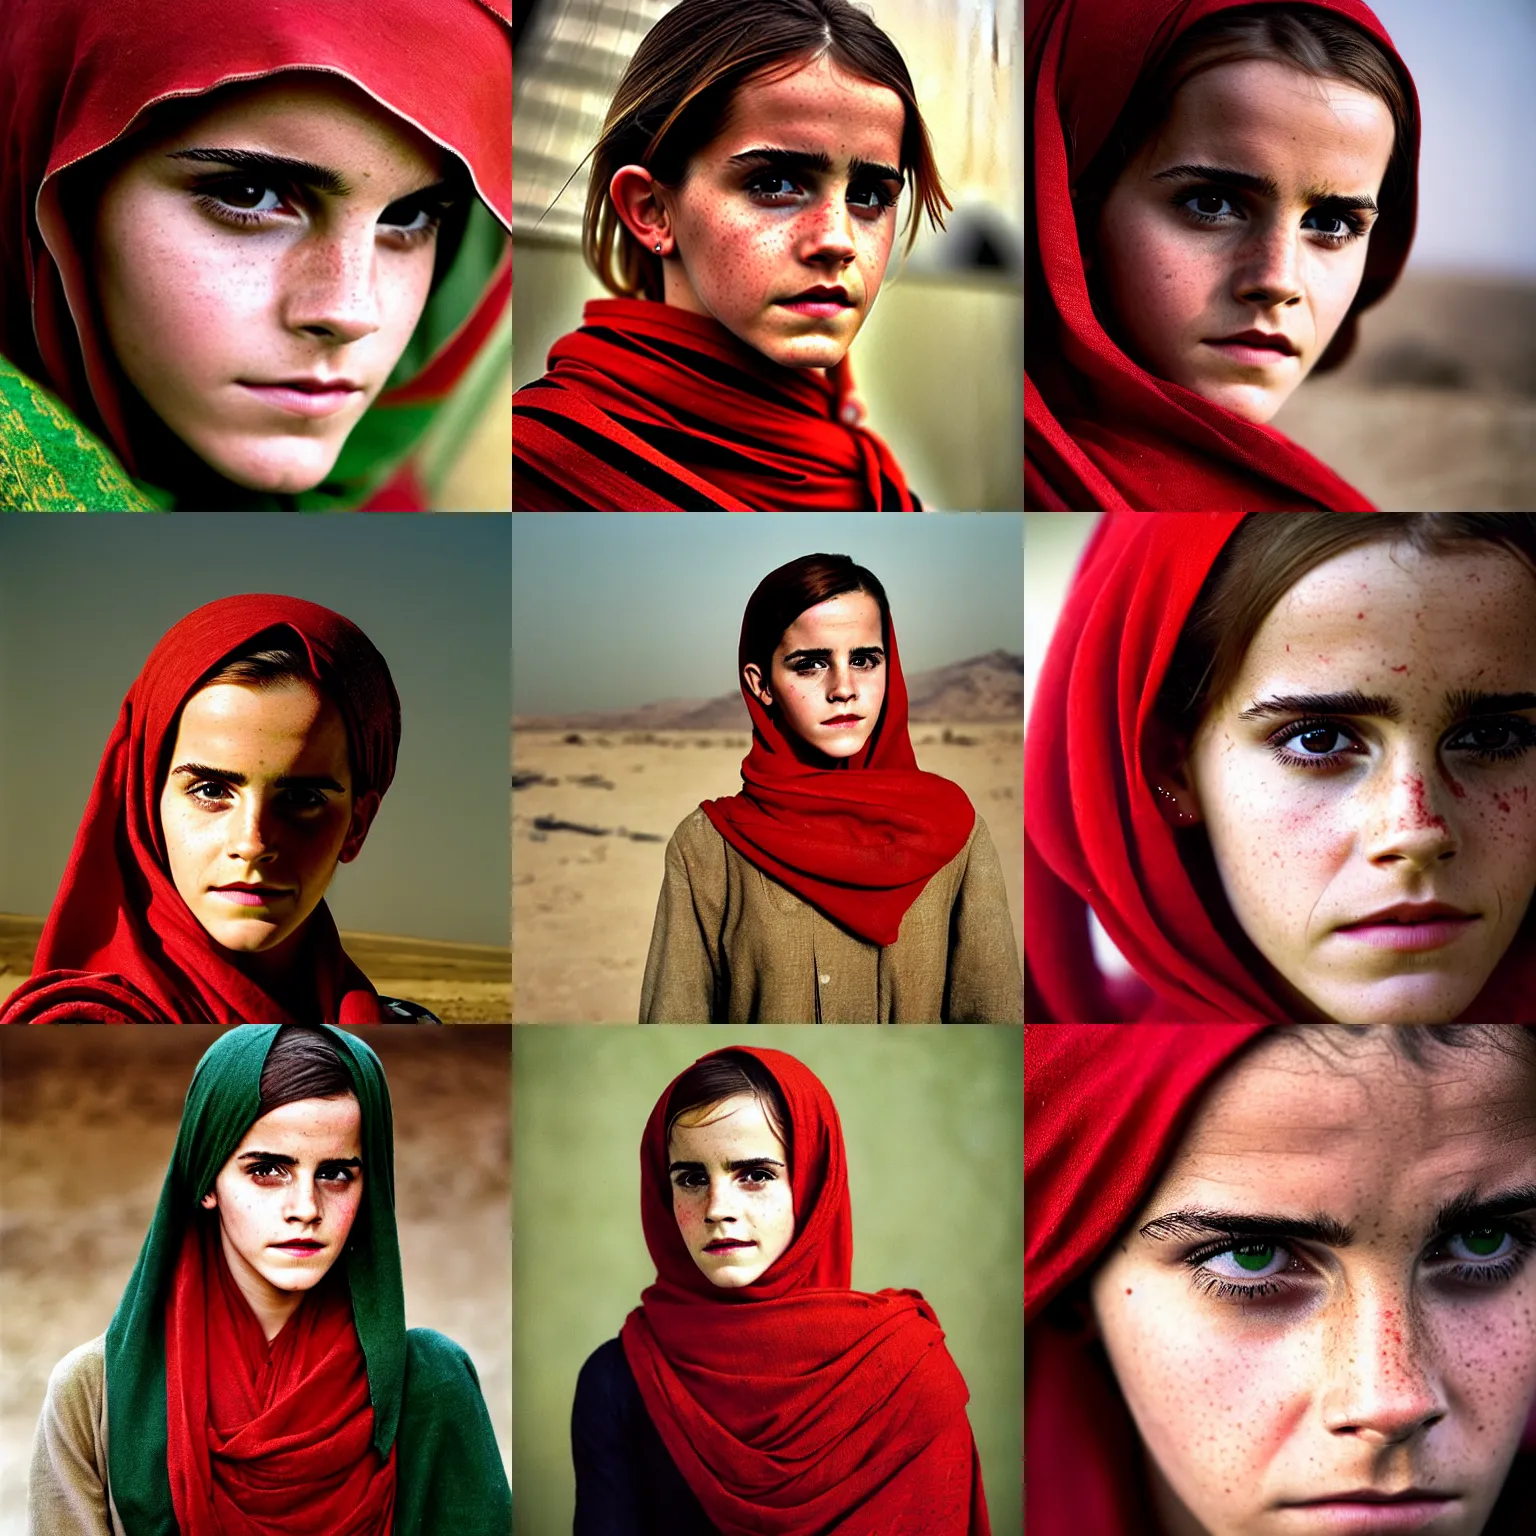 Prompt: portrait of emma watson as afghan girl, green eyes and red scarf looking intently, photograph by steve mccurry